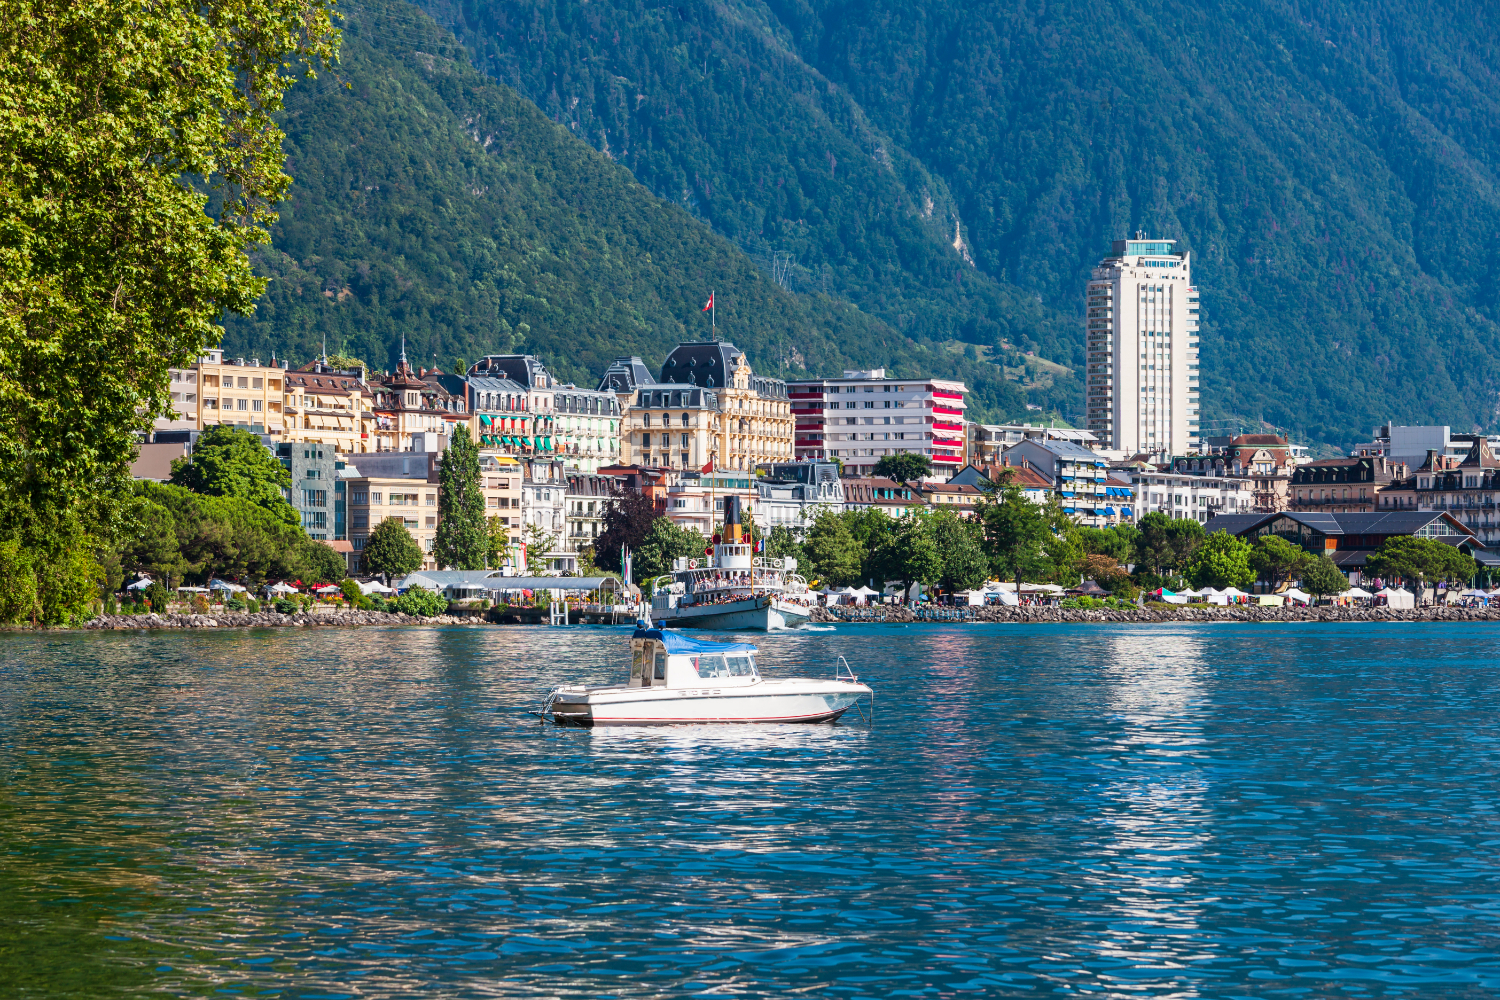 Montreux has a special micro climate